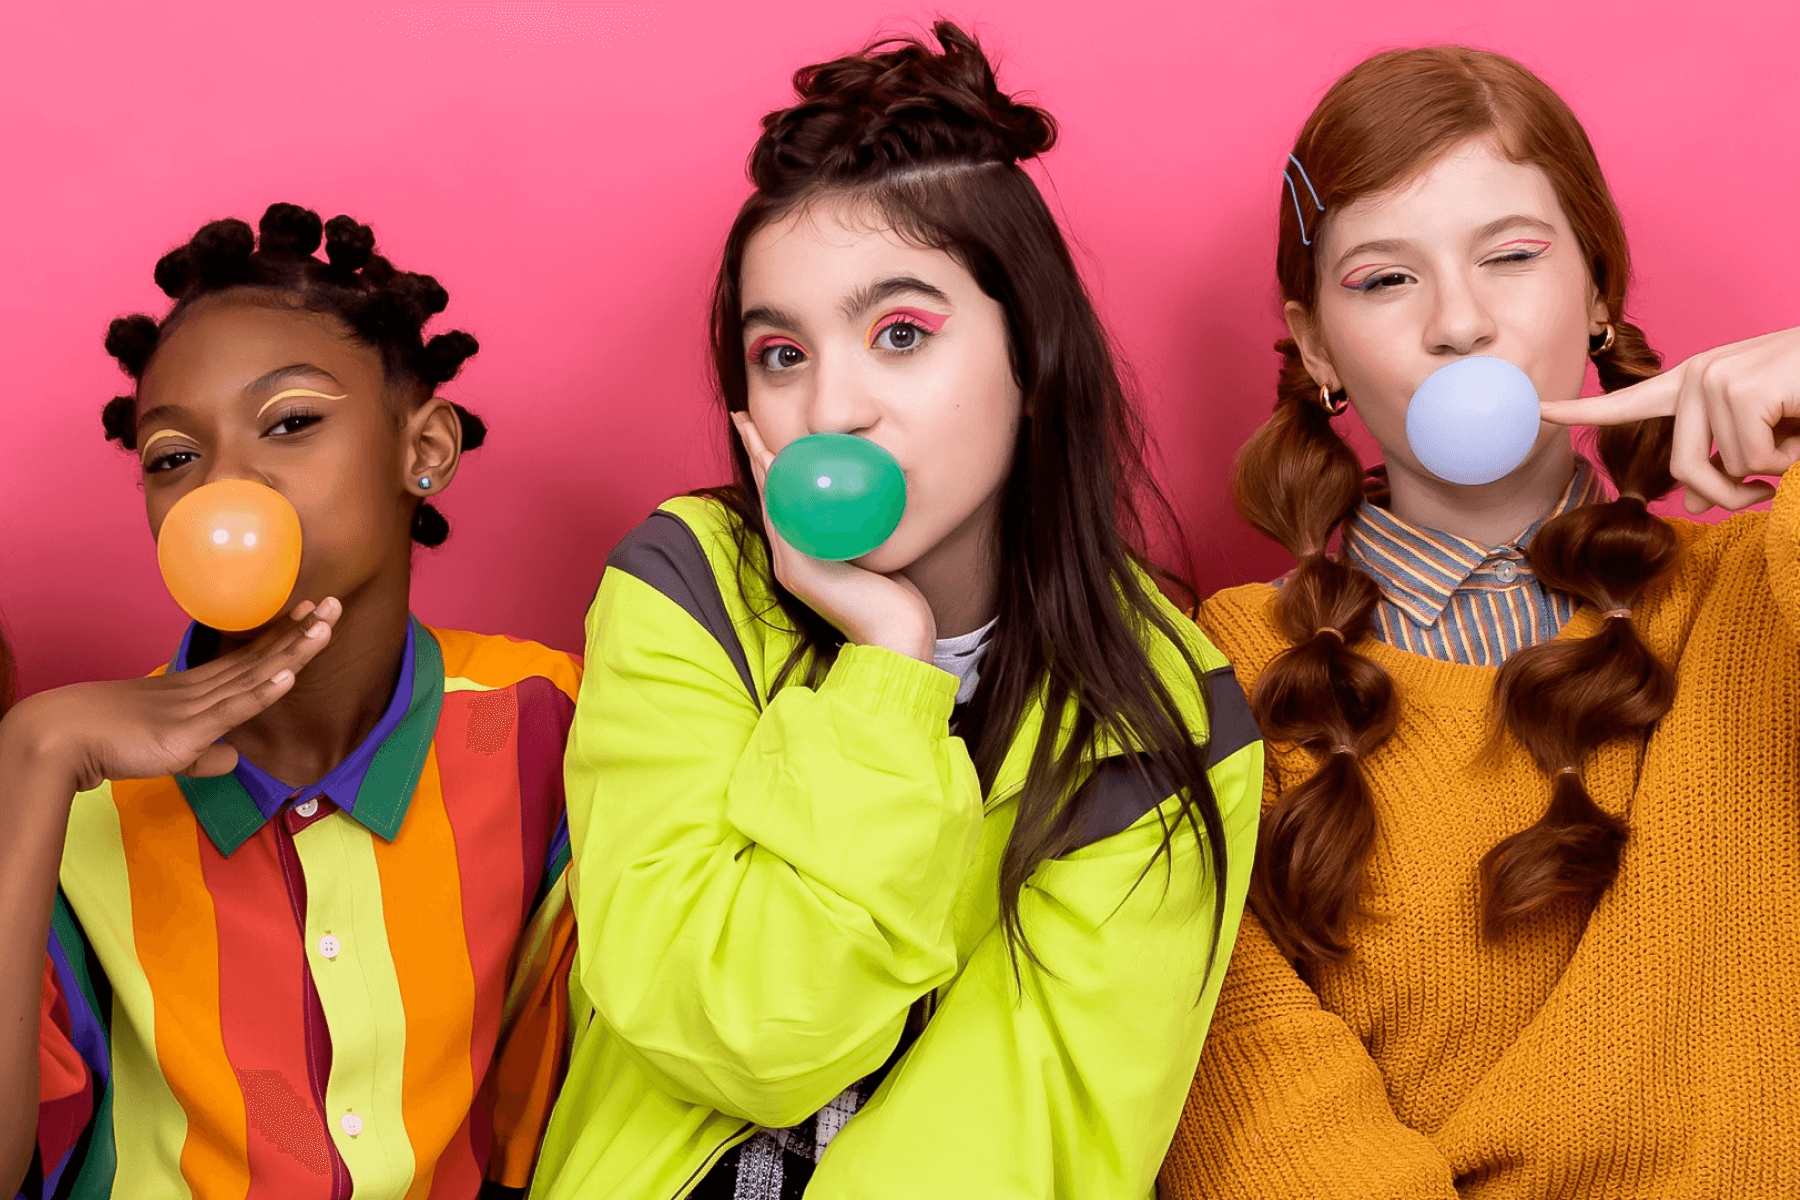 Three teenage girls in bright clothing against a pink background. They are all blowing bubbles with bright-colored gum (orange, green, and blue).